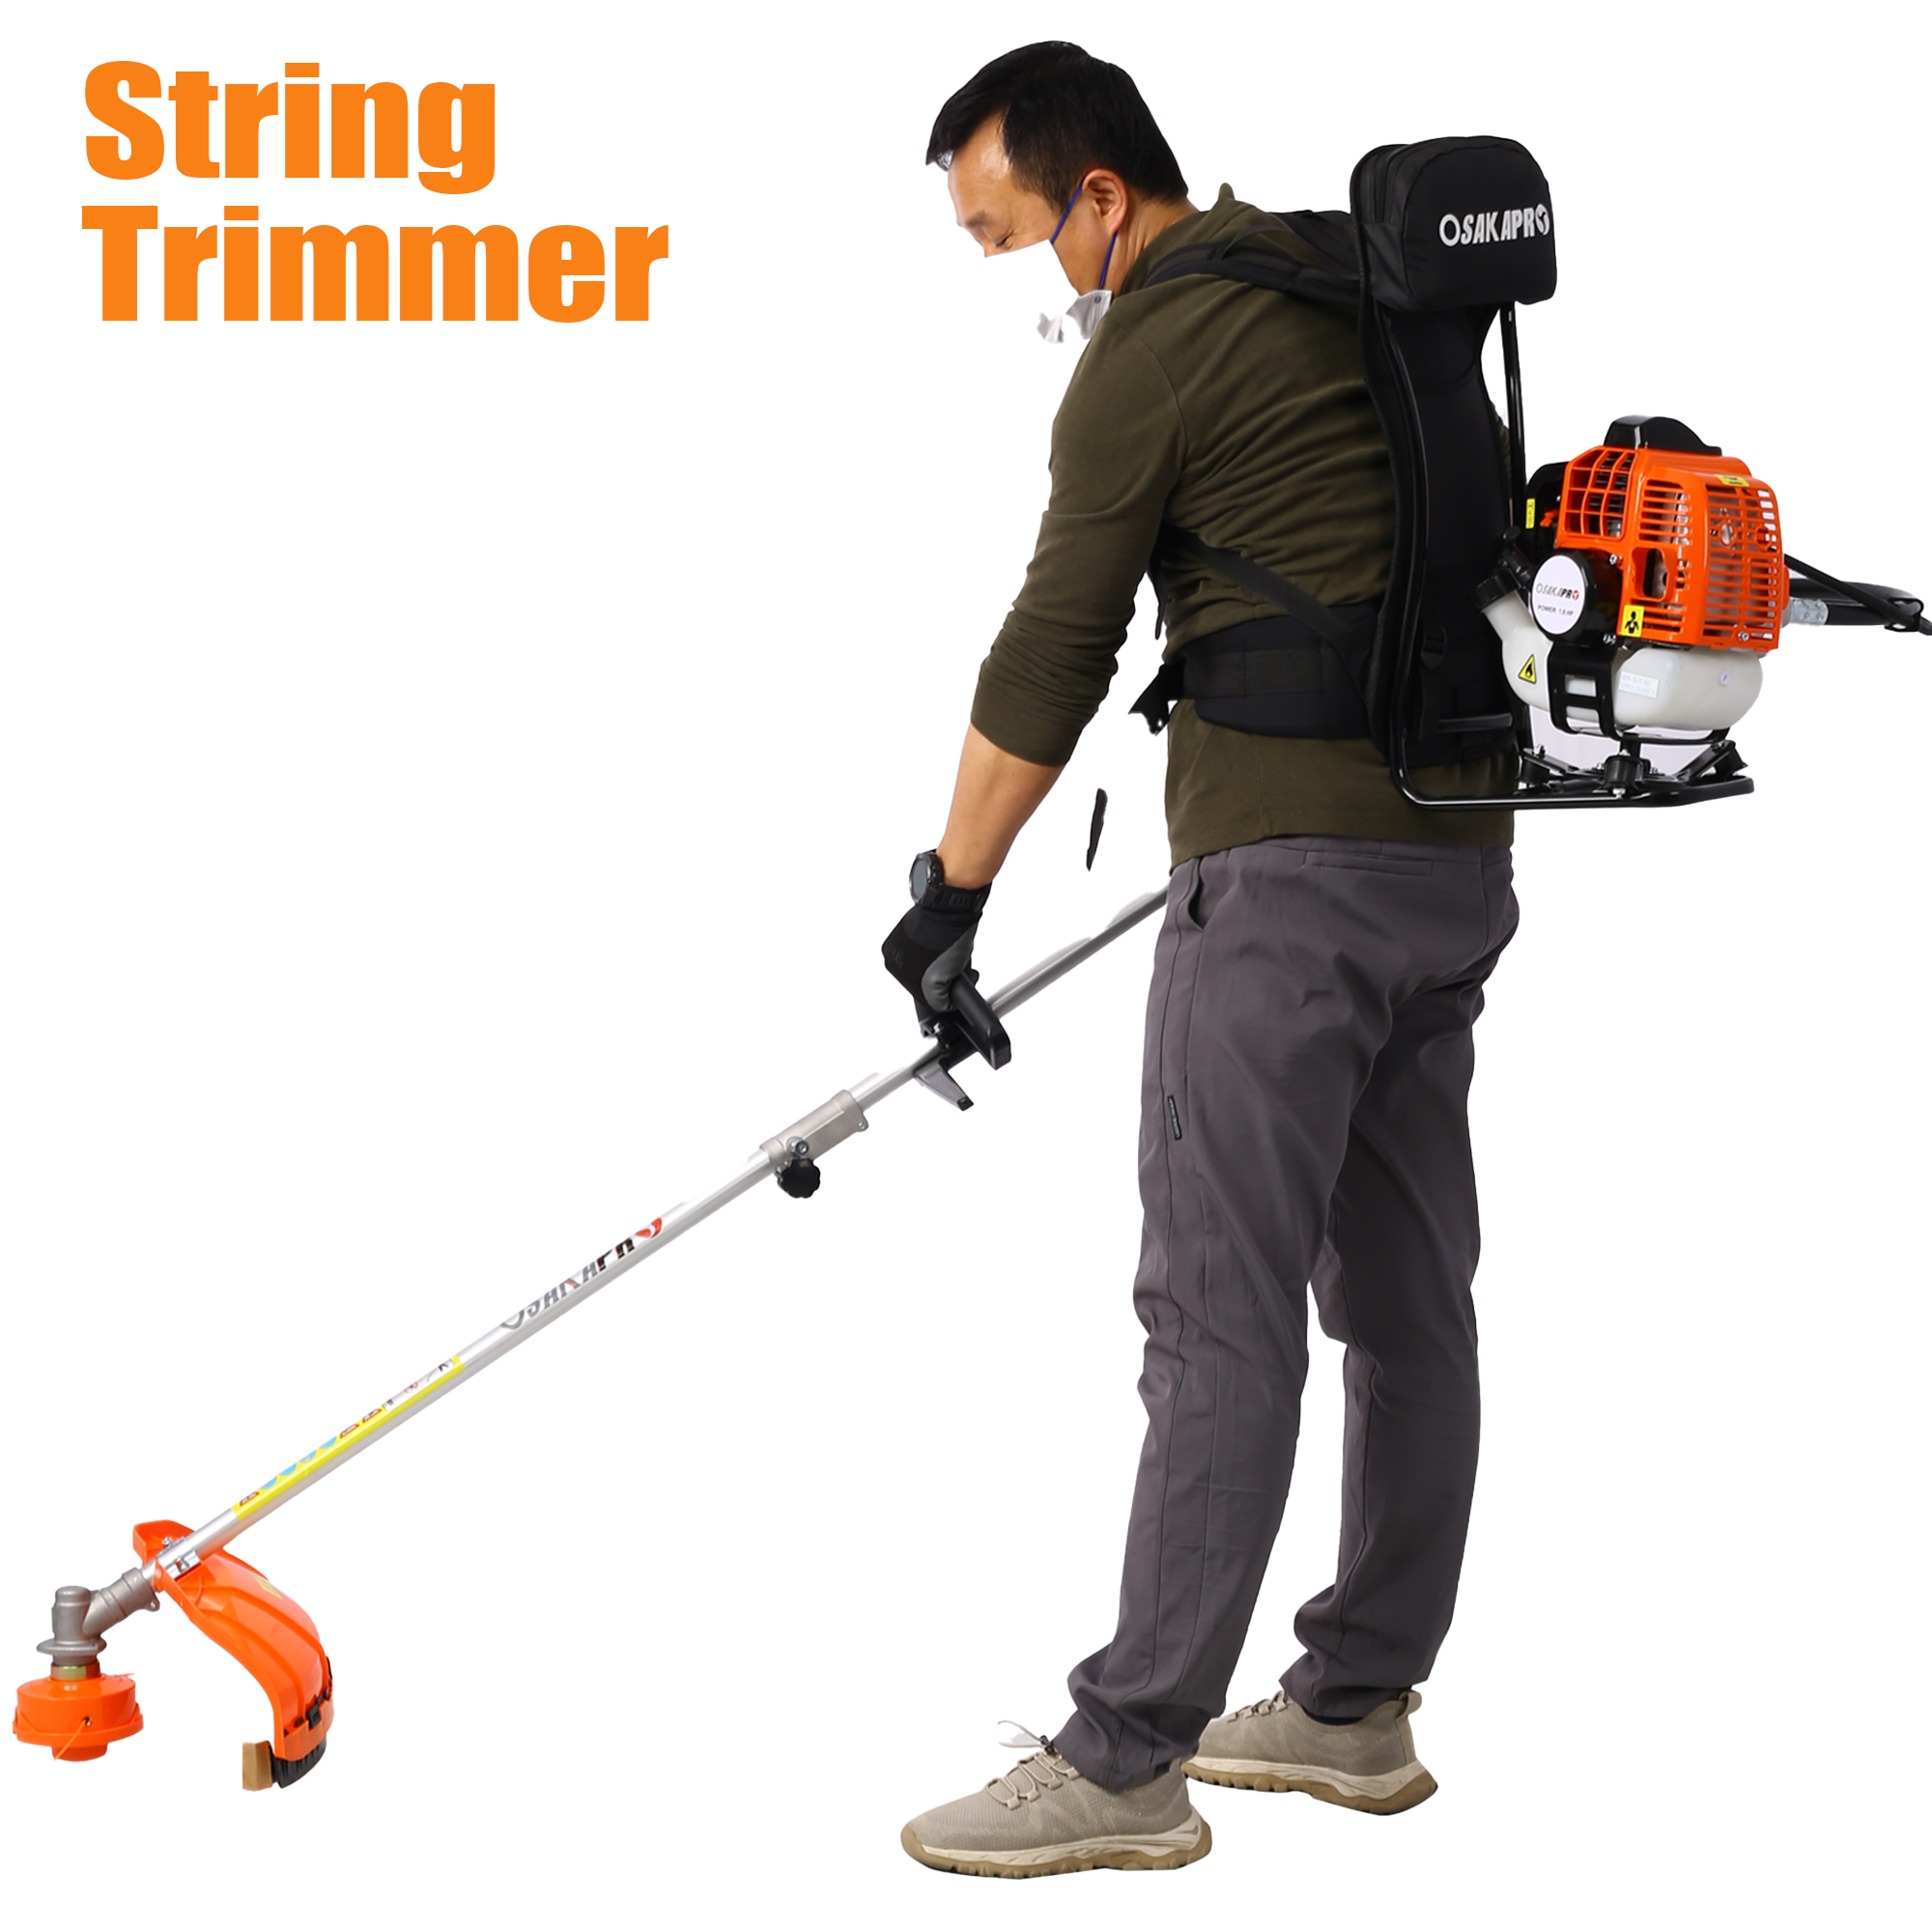 33CC 2-Cycle Grass Trimmer, Sesslife 4 In 1 Gas Powered Lawn Mower Full  Crankshaft Grass Edger with Gas Pole Saw, Hedge Trimmer, Grass Trimmer,  Brush Cutter Attachment, Orange 